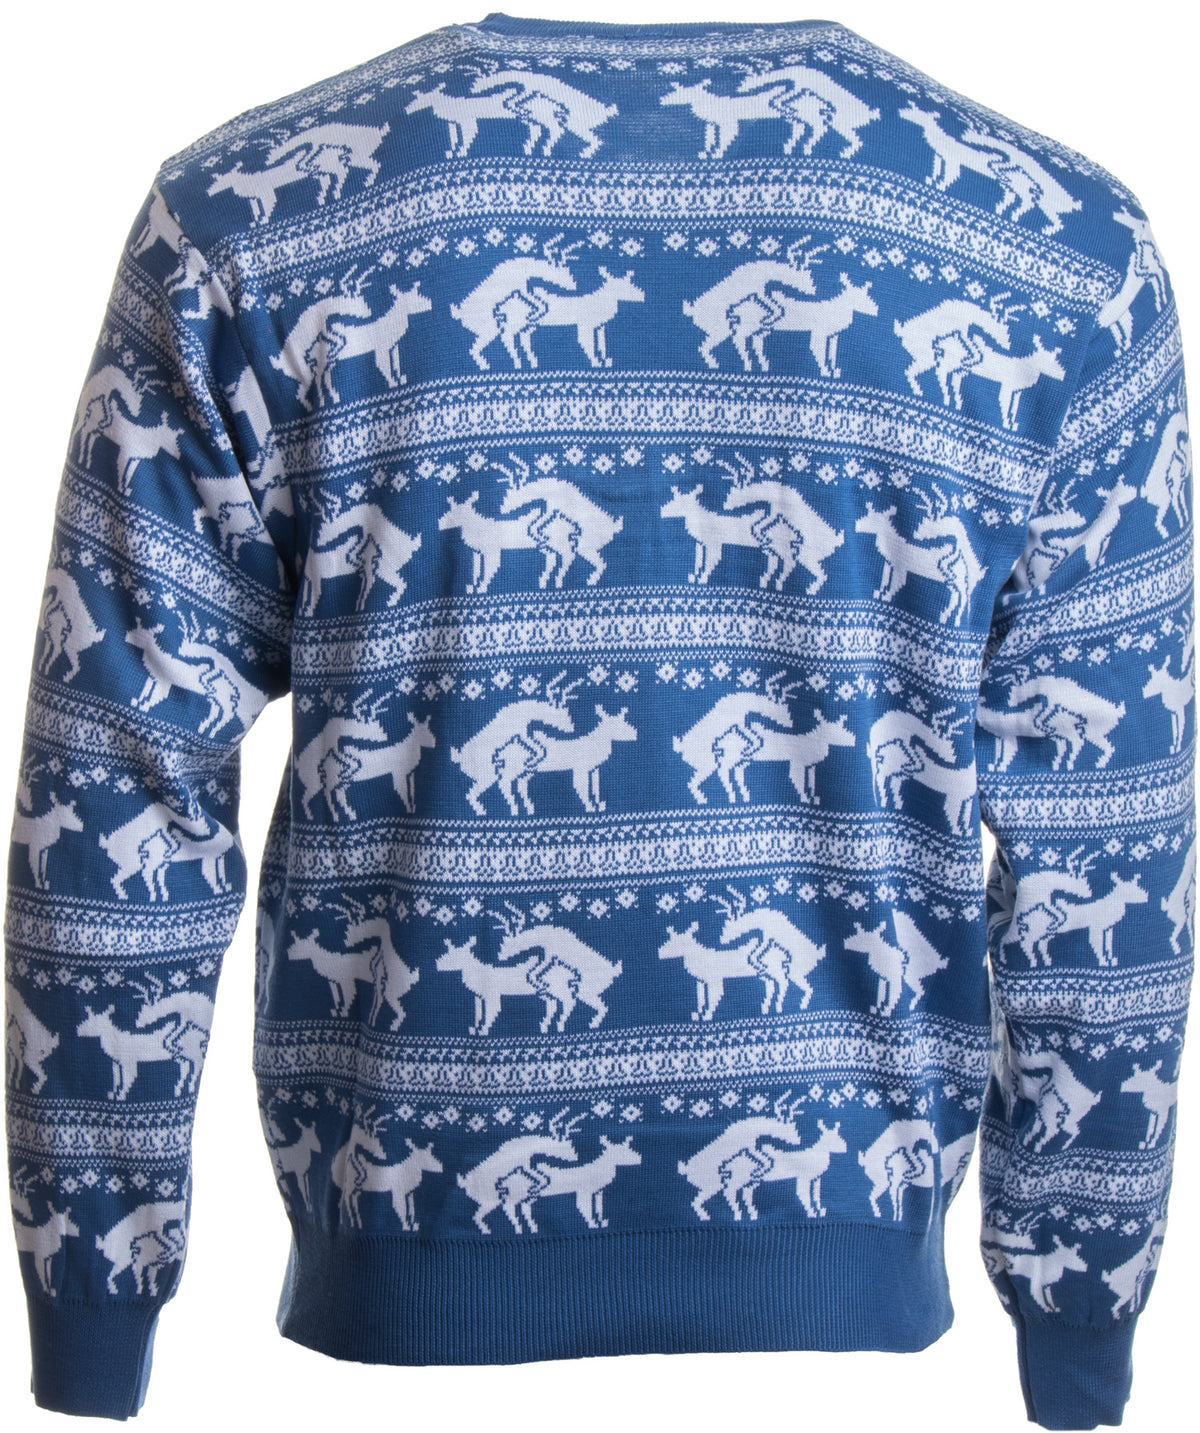 Blue Reindeer Humping Ugly Christmas Sweater w/ Holiday Insertion & Christmas Dongs